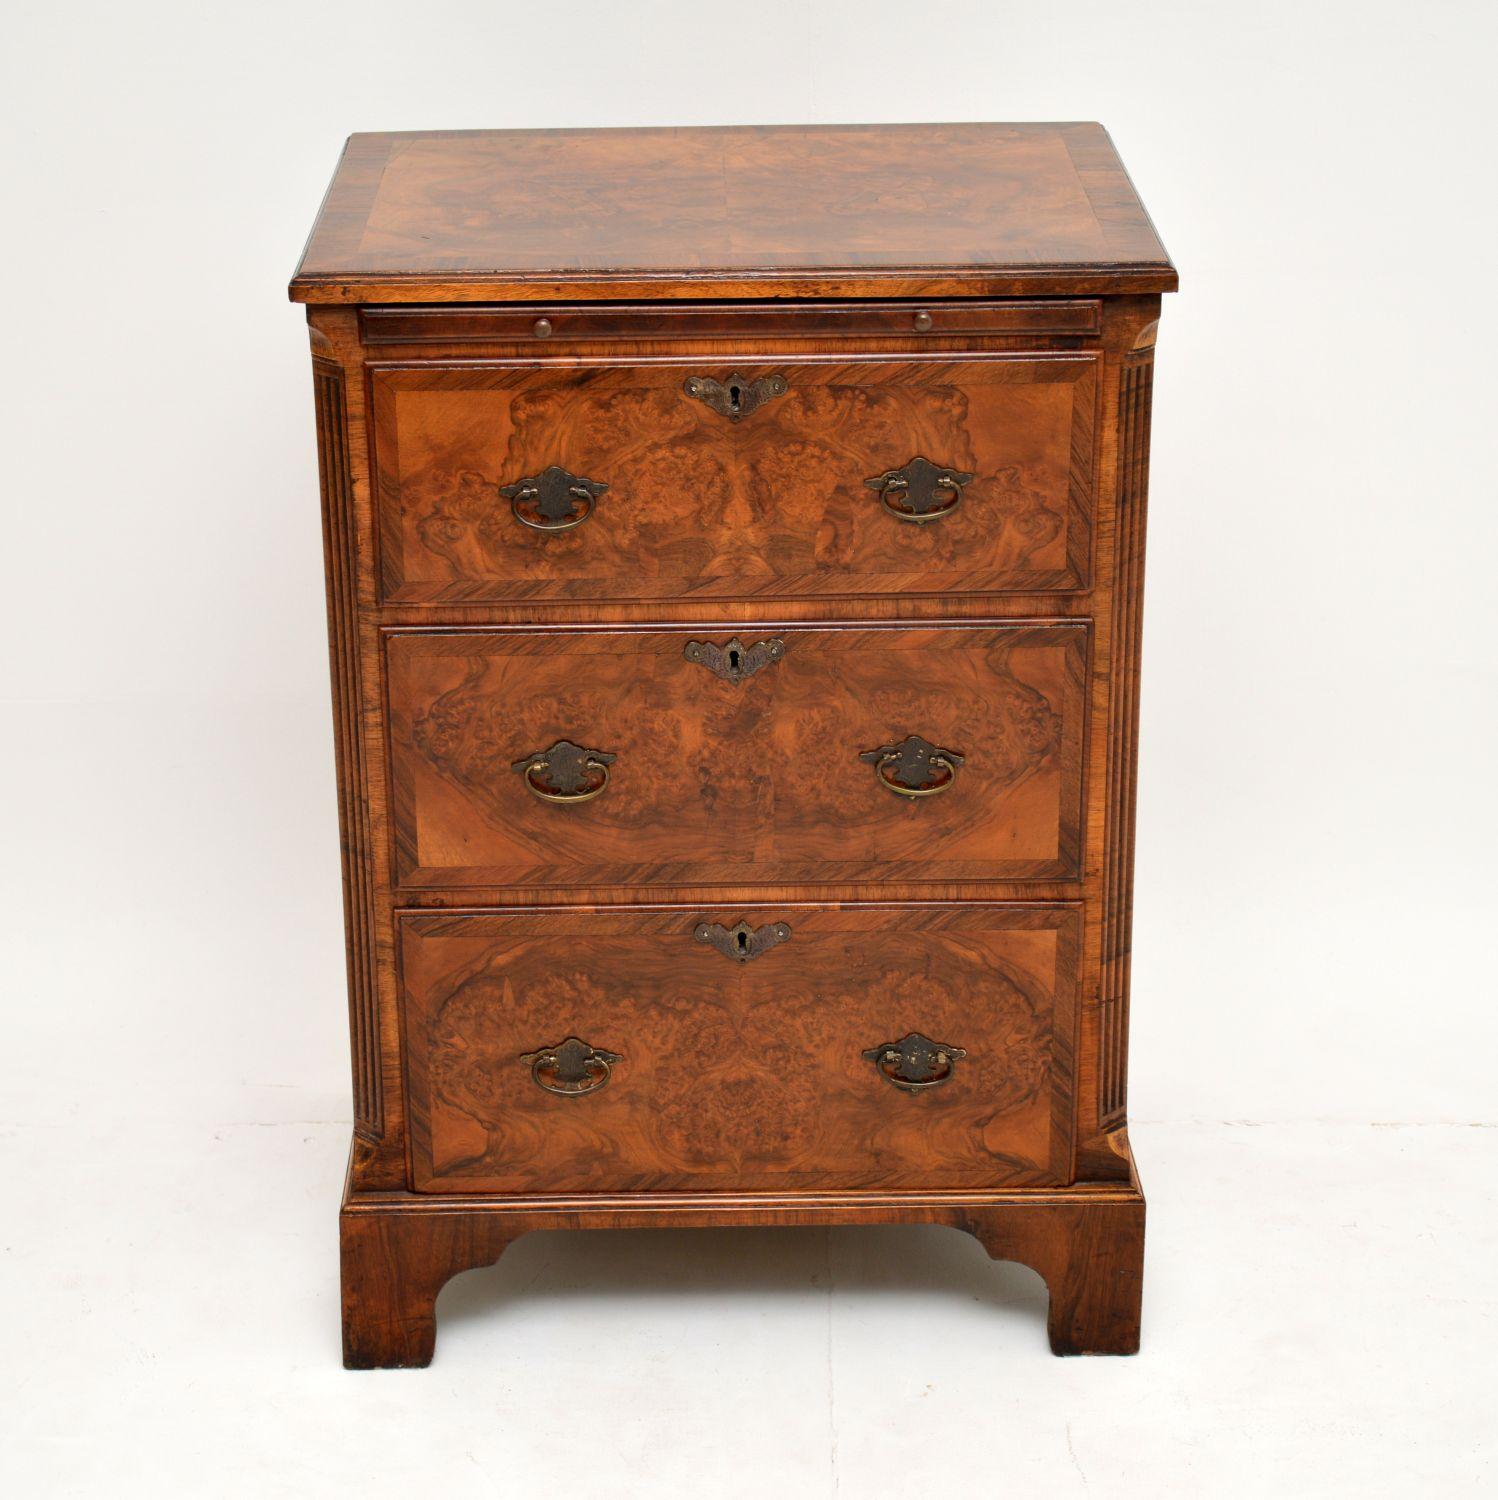 Exceptional quality antique burr walnut chest of drawers of small proportions & with a lovely original colour. This chest has many wonderful features, so please enlarge all the images.

The top is burr walnut with a figured walnut cross banding &